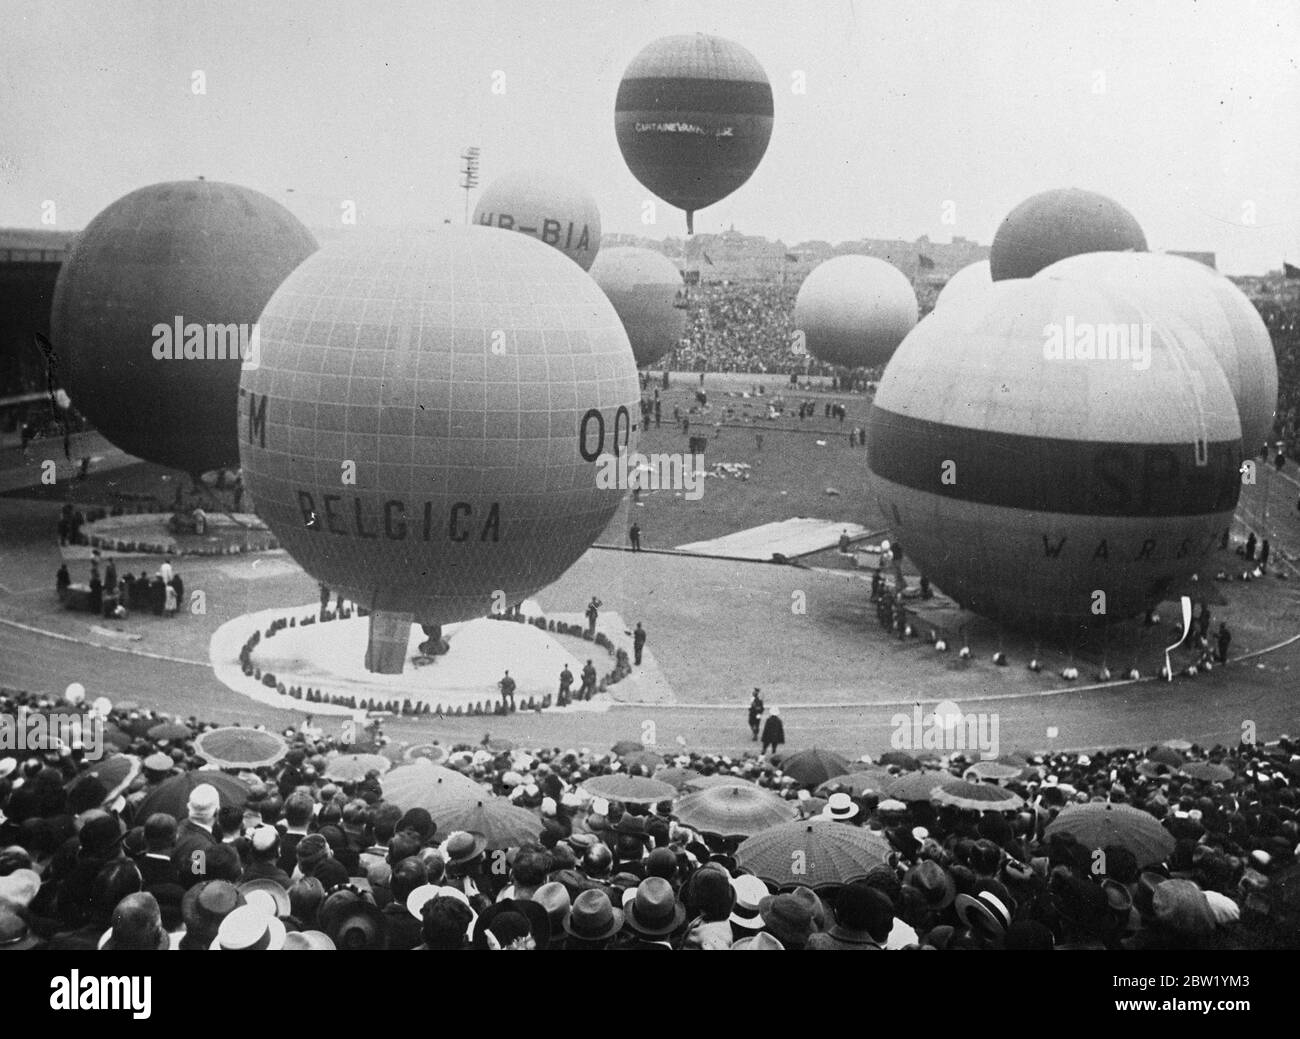 Balloons start from Brussels in Gordon Bennett race. Balloonists started from the Heysel Stadium, Brussels, in the annual Gordon Bennett balloon race. This year's event is the 25th of the series. Photo shows, at the start of the race with the balloons about to ascend. 21 June 1937 Stock Photo